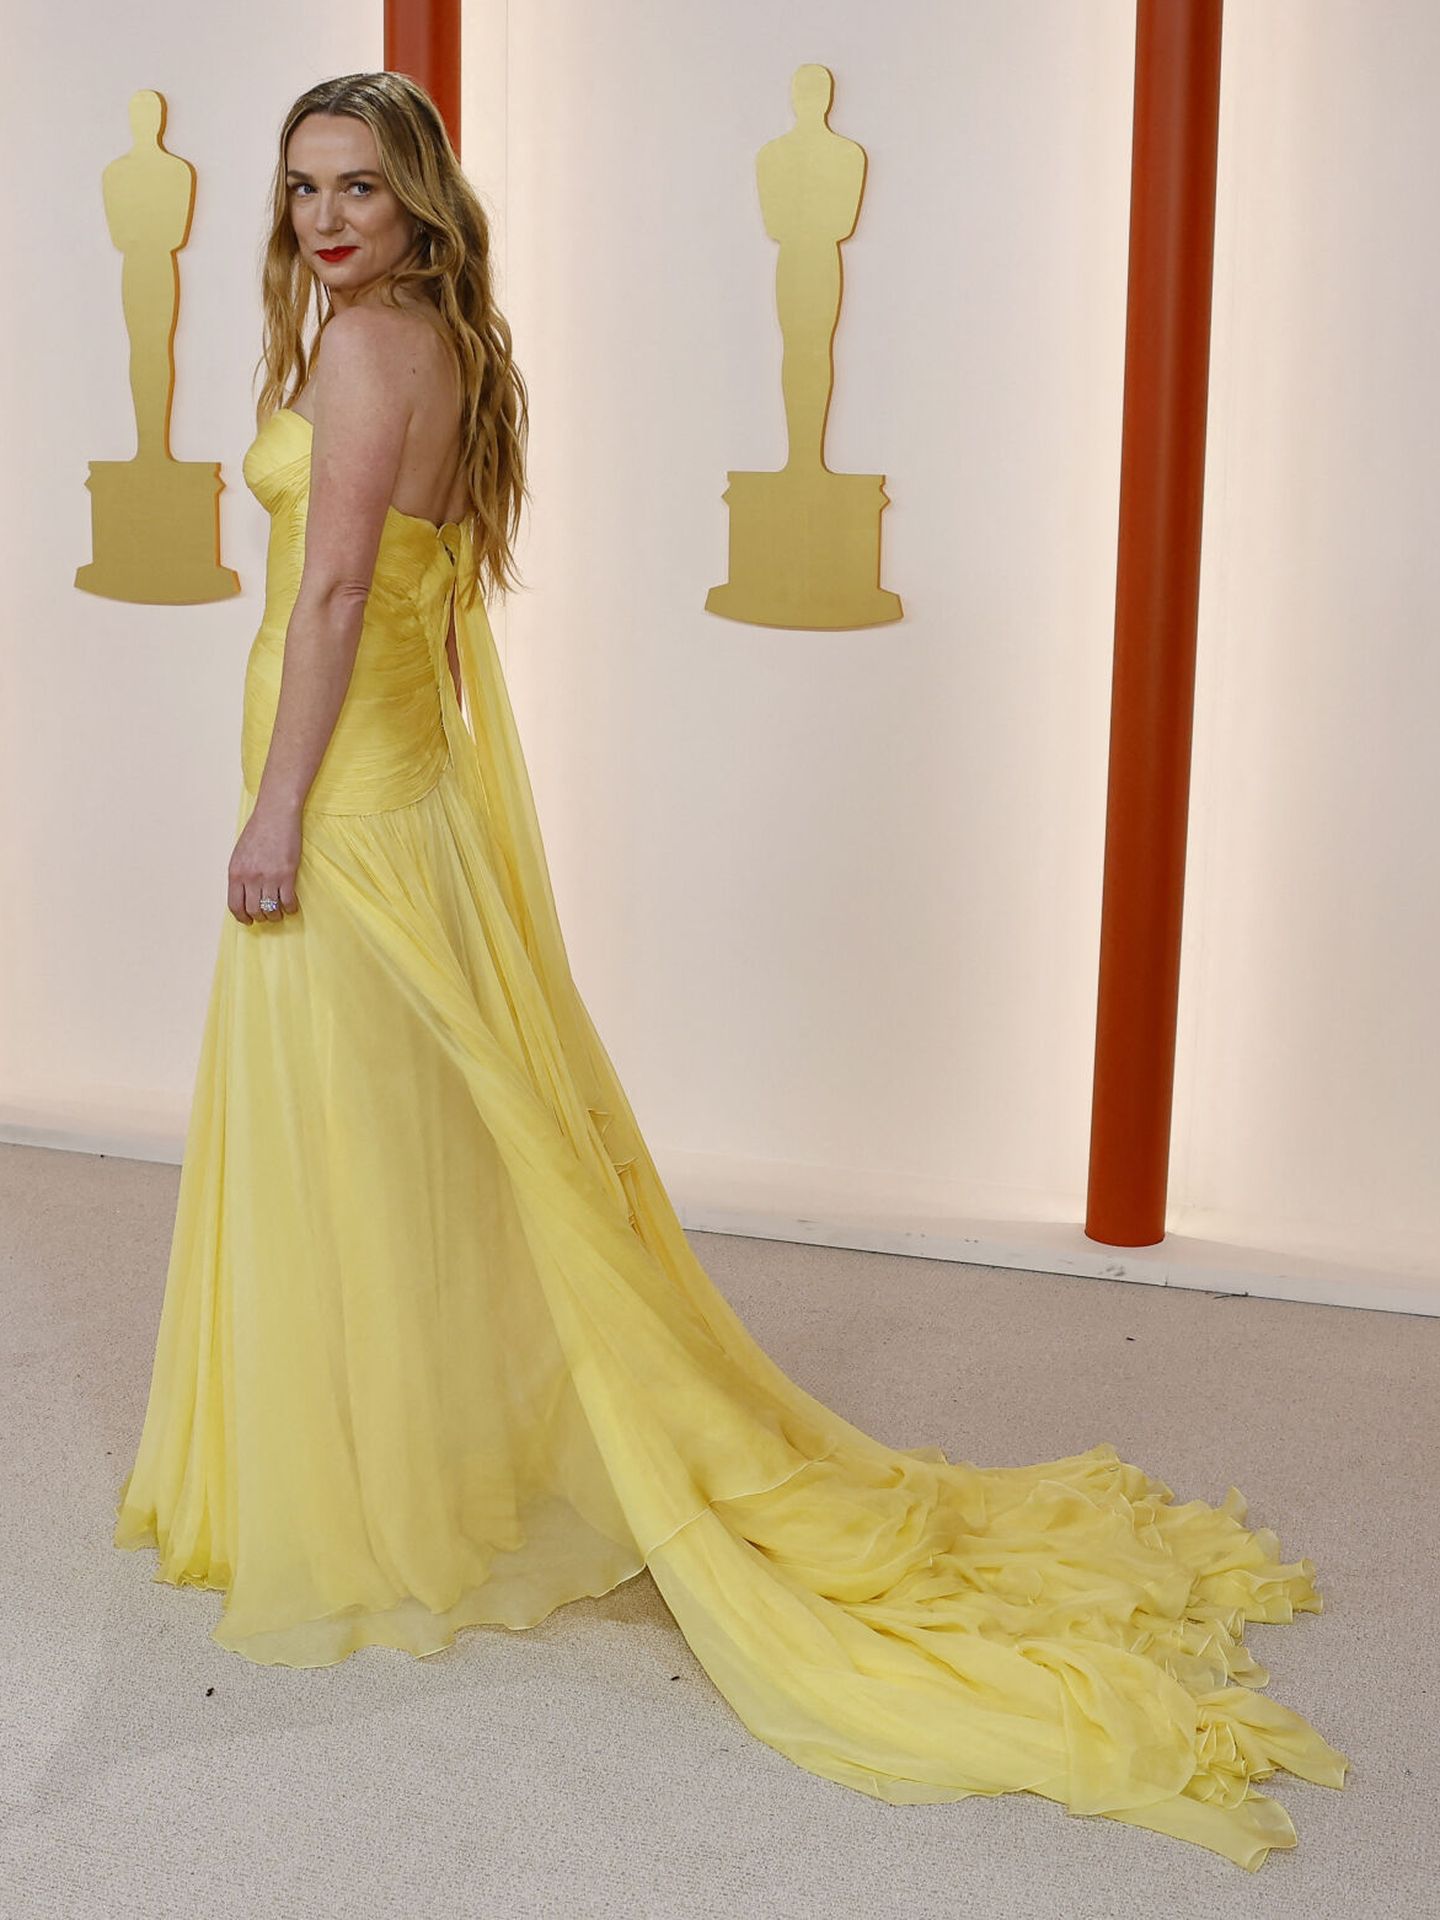 Kerry Condon poses on the champagne-colored red carpet during the Oscars arrivals at the 95th Academy Awards in Hollywood, Los Angeles, California, U.S., March 12, 2023. REUTERS Eric Gaillard